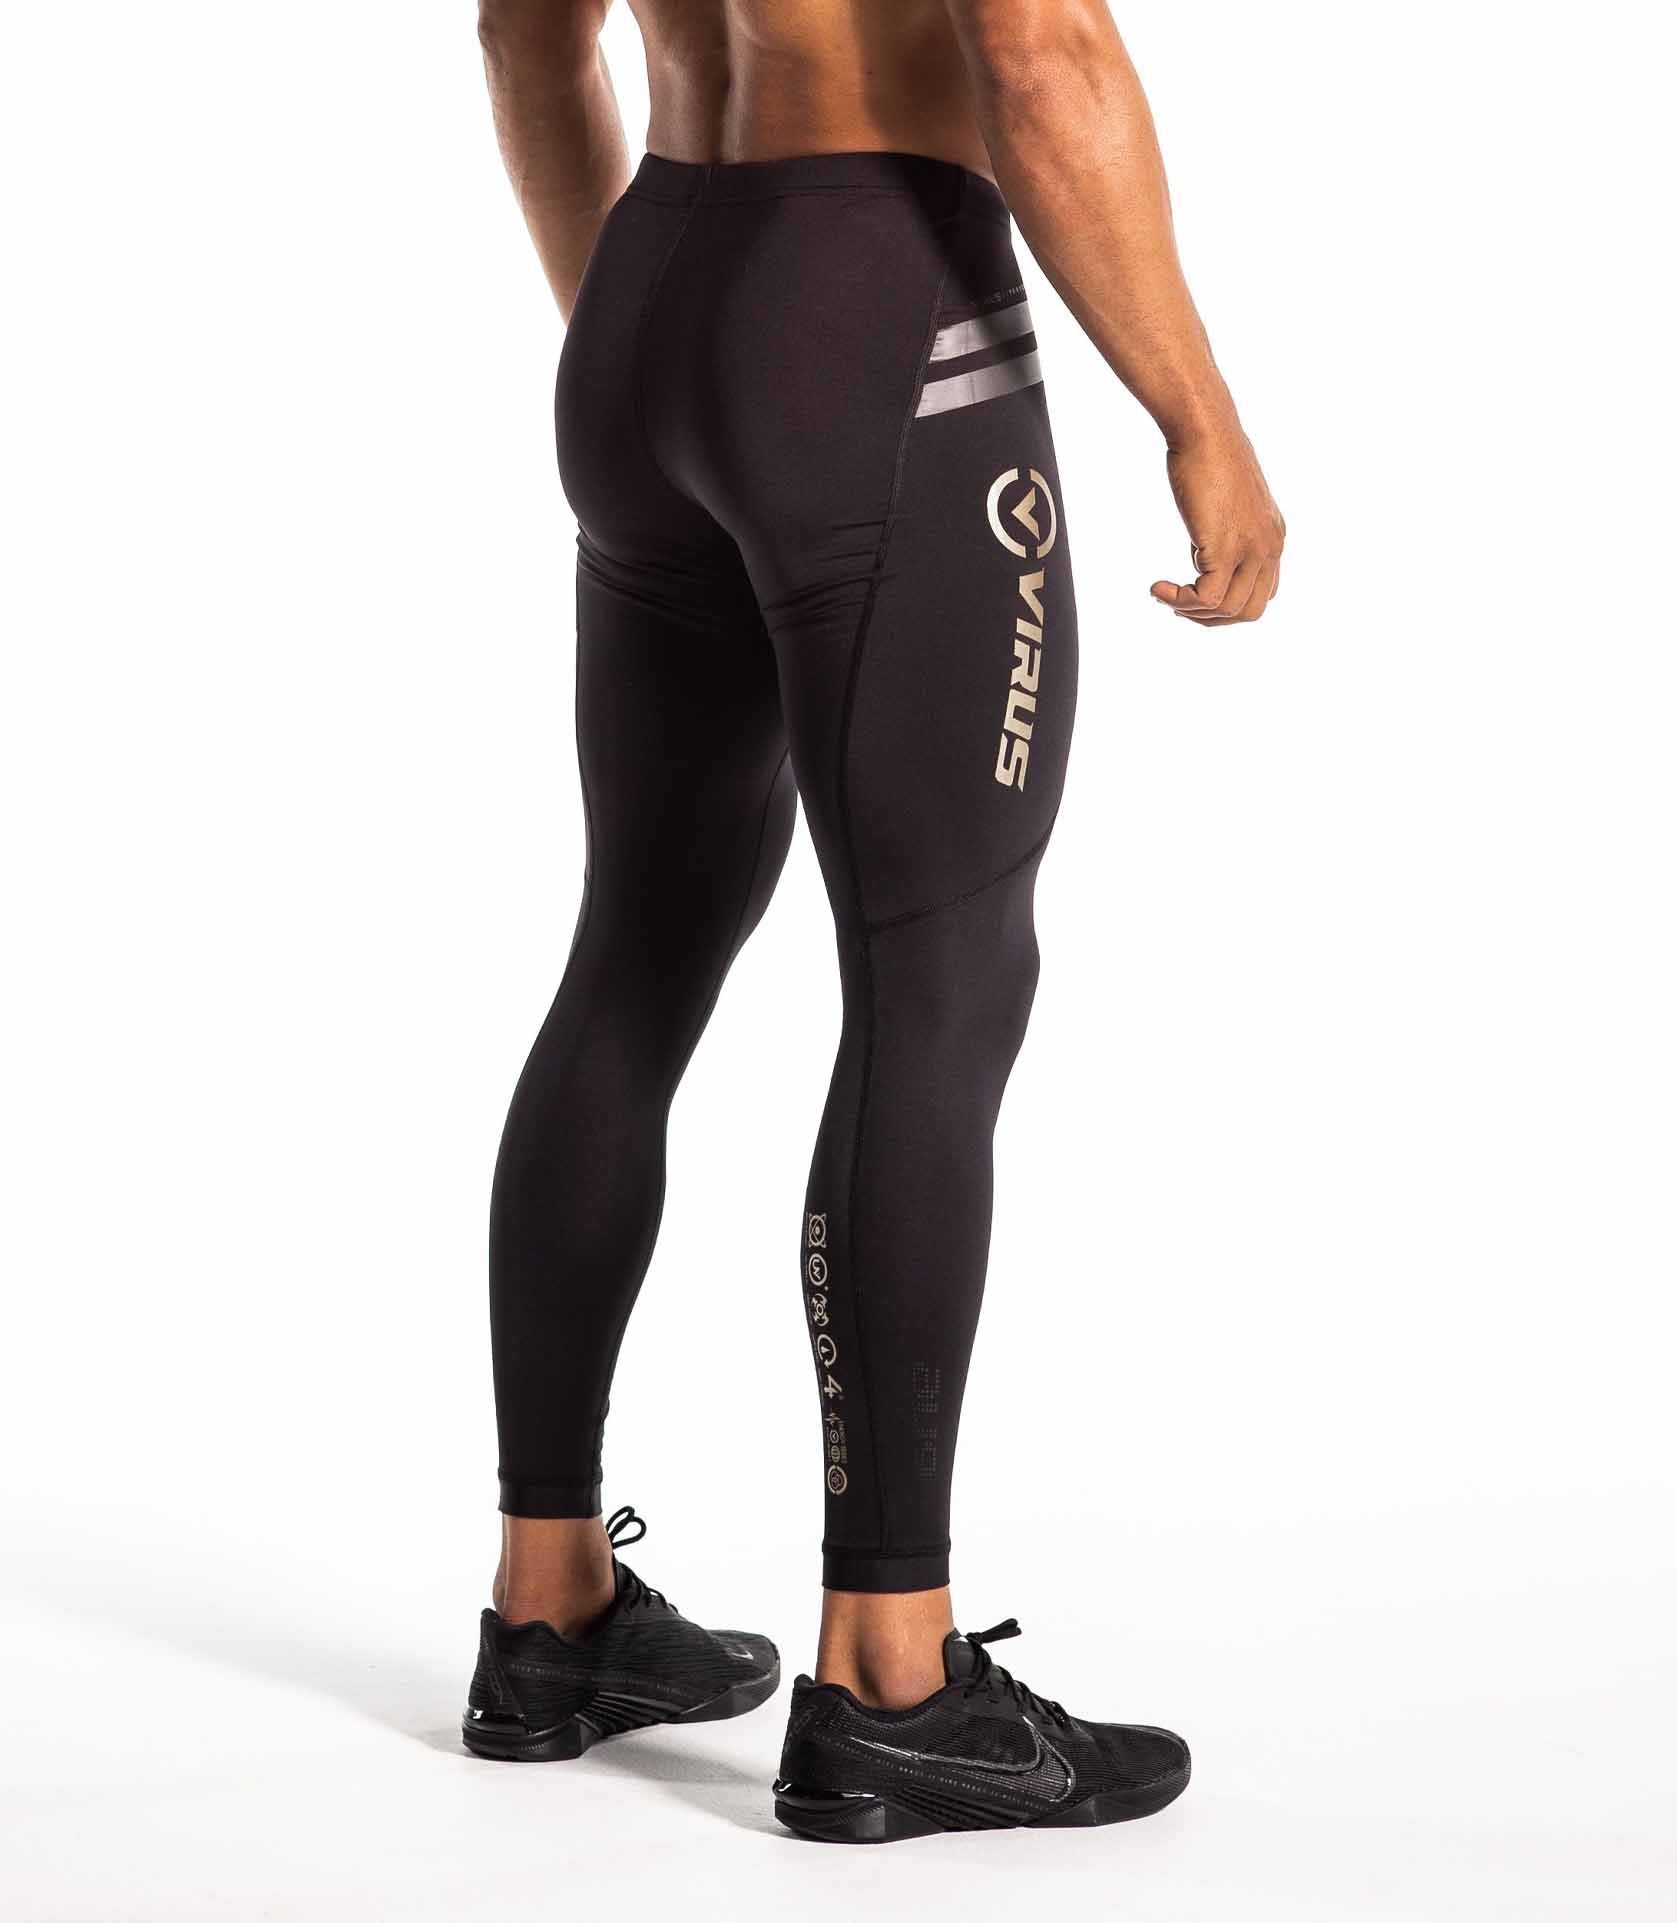 Best Compression Pants For Lifting  Virus Intl Compression Pants & Shorts  